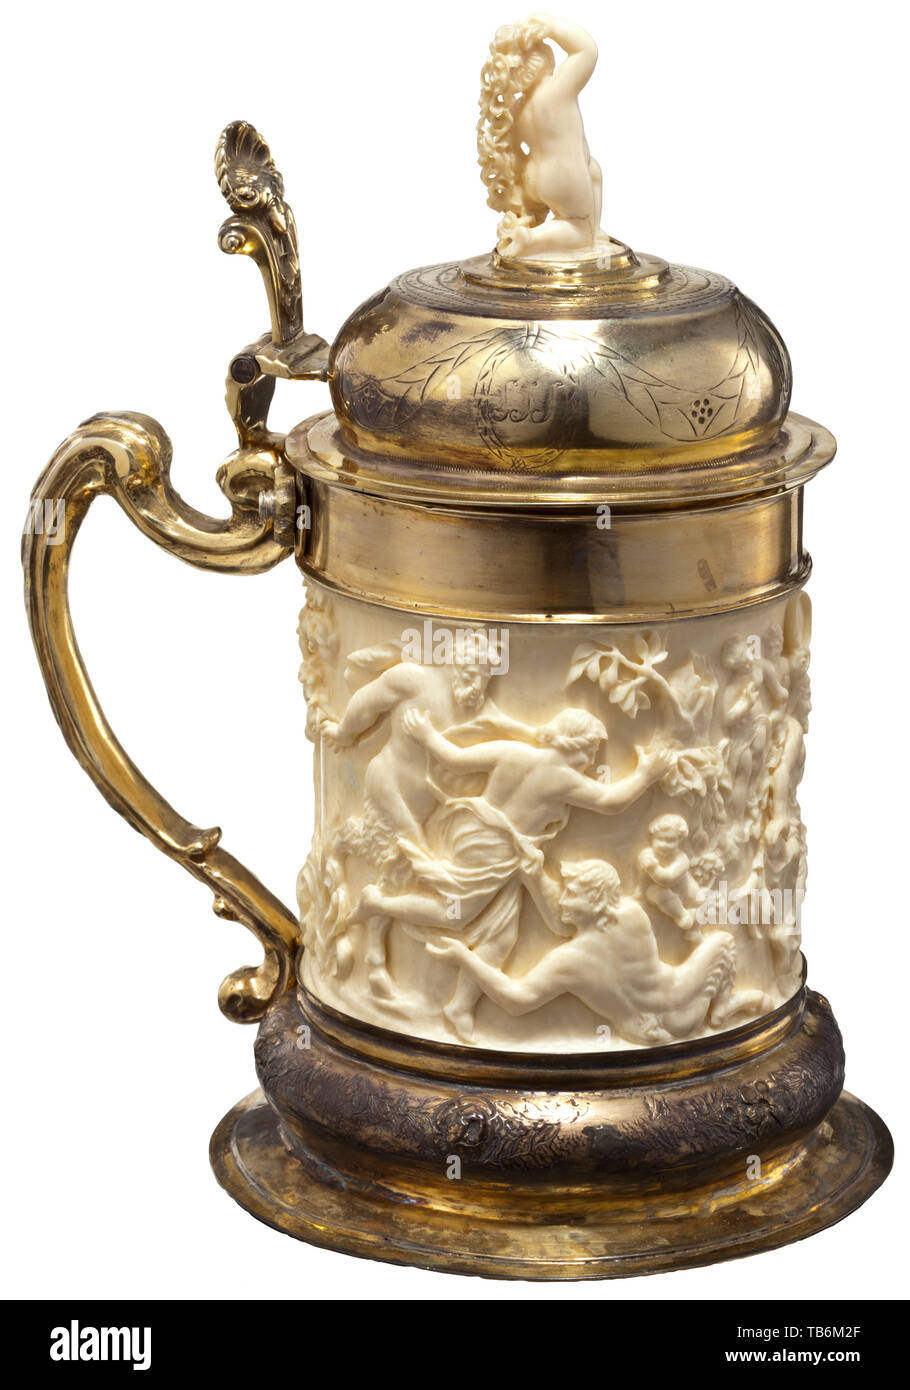 A German vermeil-mounted ivory tankard, circa 1860, Elaborately crafted tankard in baroque style. Body made of ivory with continuous multi-figured Bacchanalian scene in half relief. Depiction of a recumbent Dionysius surrounded by satyrs and bacchantes. Mounting of fire-gilt silver, the foot with engraved and partly chased flower ornaments. Screw-mounted volute handle, shell-shaped thumb piece with mascaron. Hinged domed lid decorated with engraved garlands and monogram cartouche 'MCS'. The top of the lid is crowned with a kneeling ivory putto wi, Additional-Rights-Clearance-Info-Not-Available Stock Photo